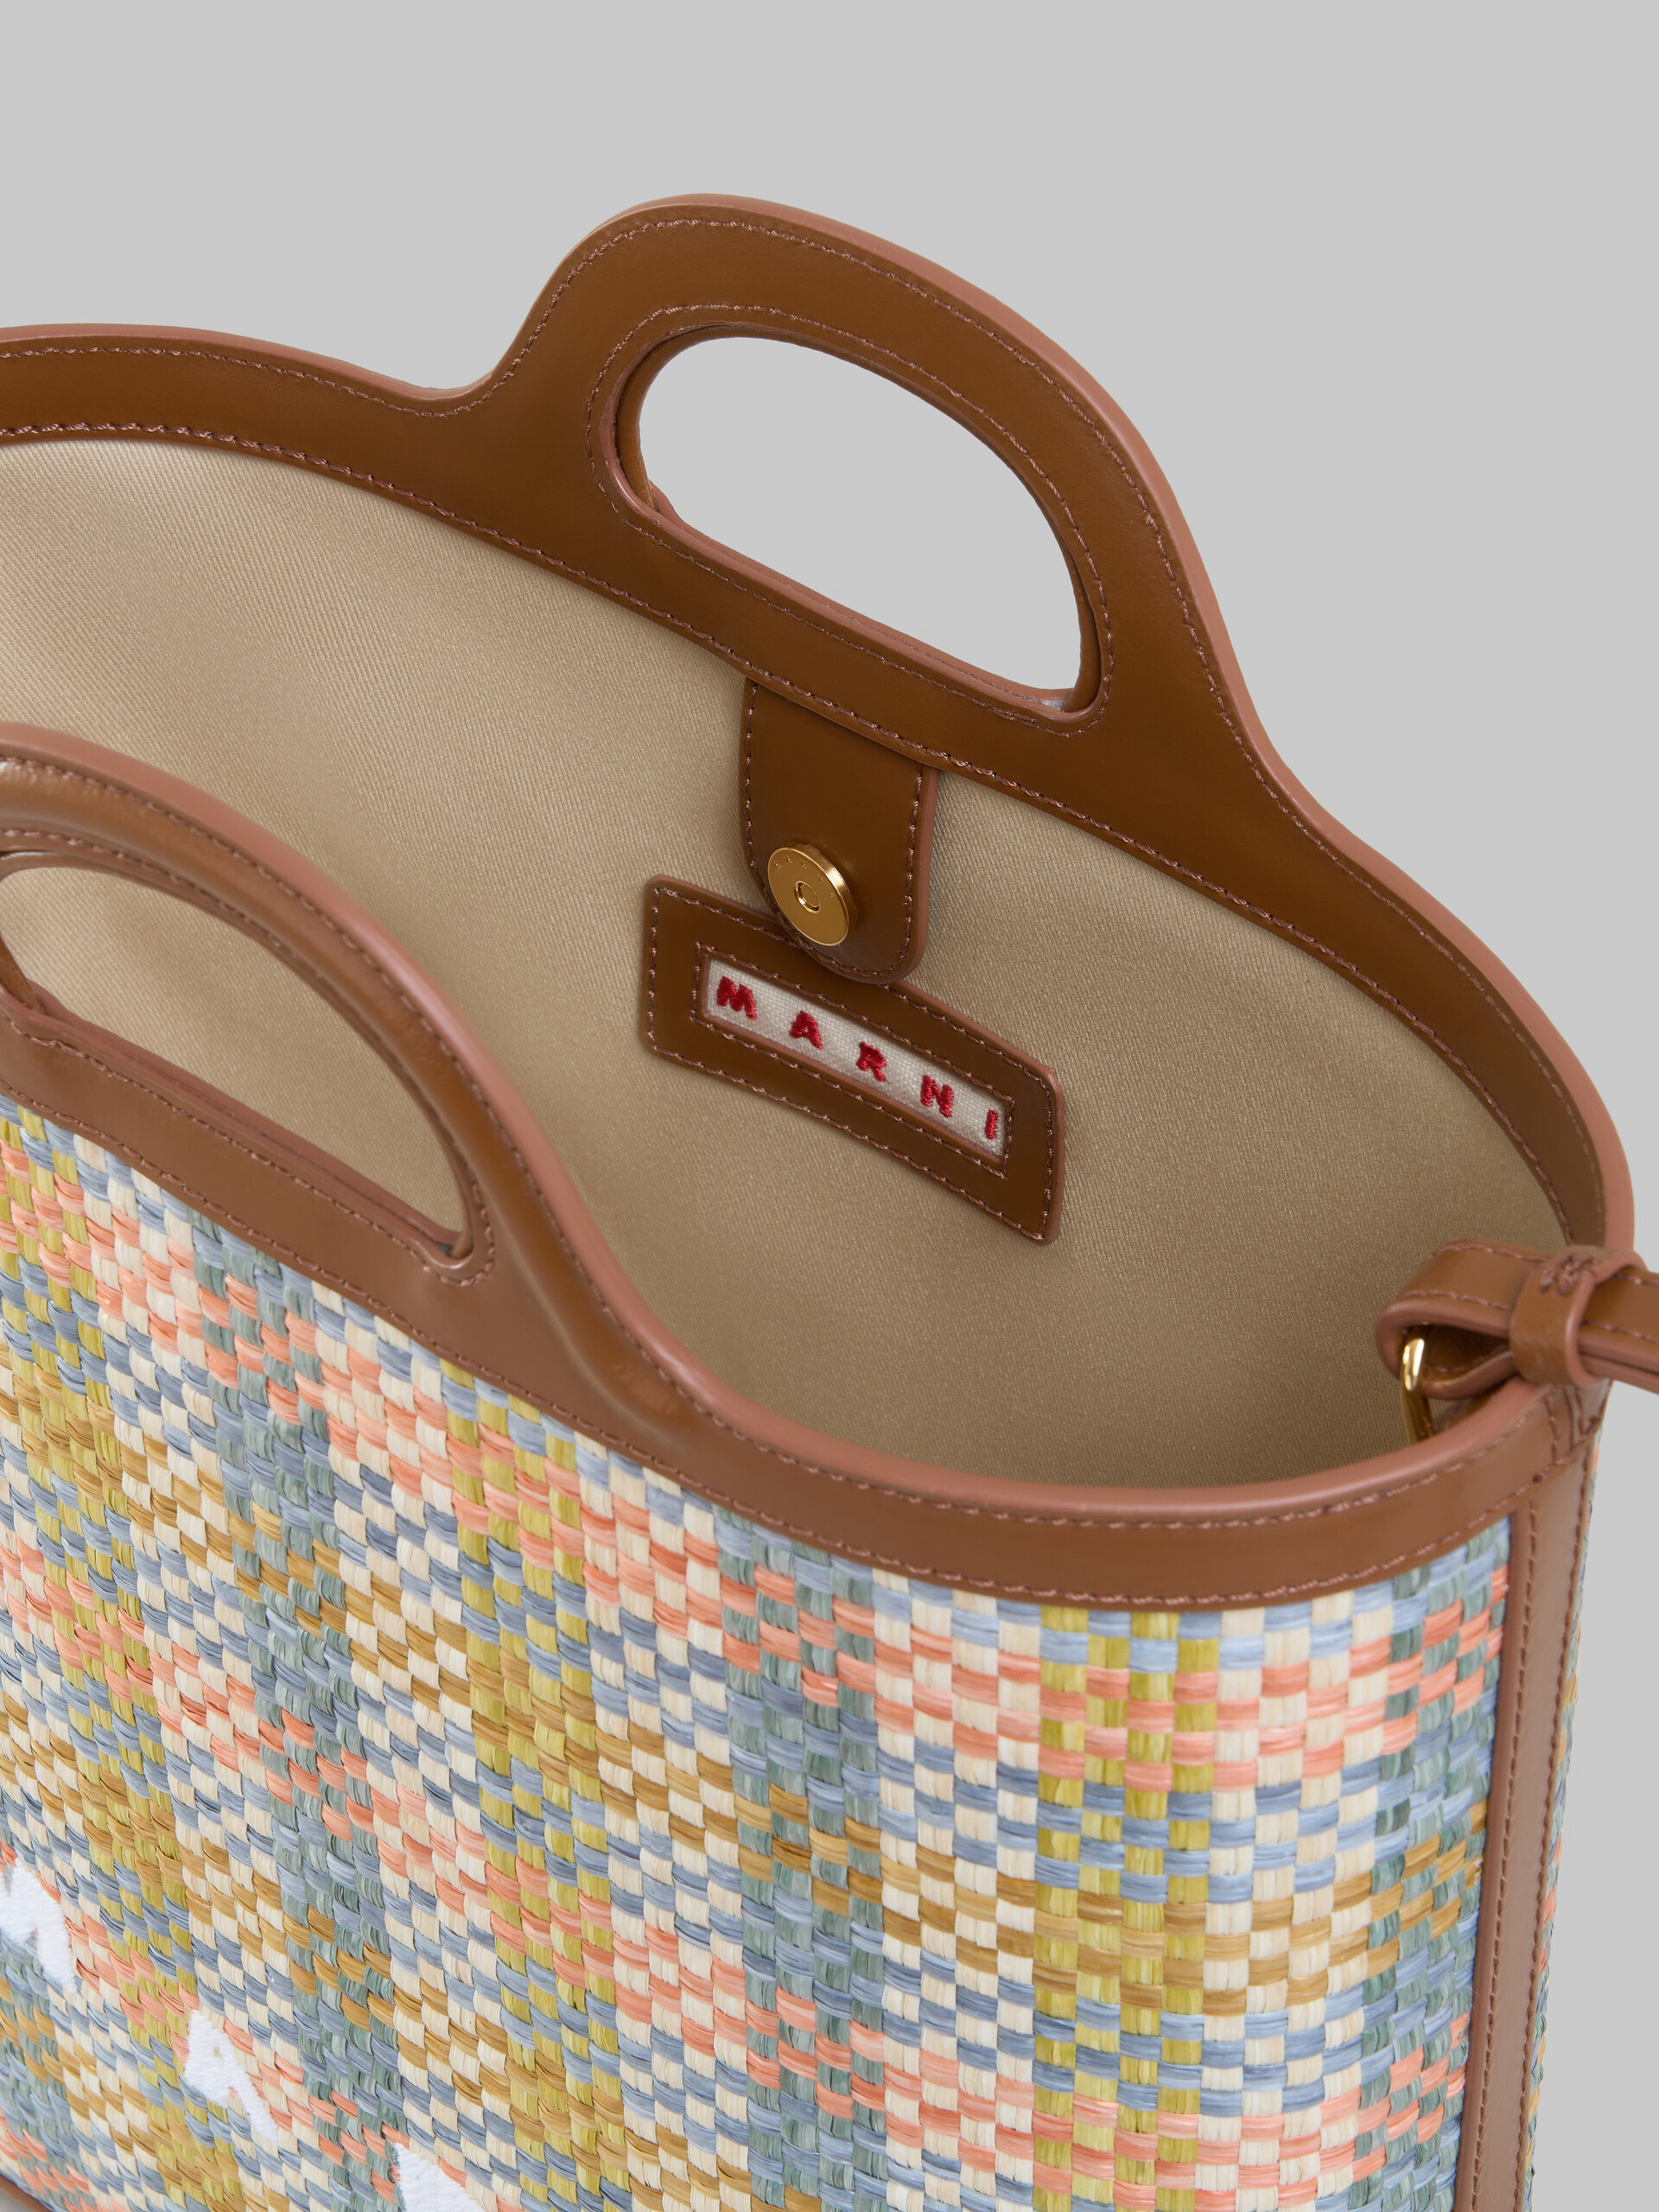 Tropicalia crossbody bag in brown leather and checked raffia-effect fabric - Shoulder Bags - Image 4